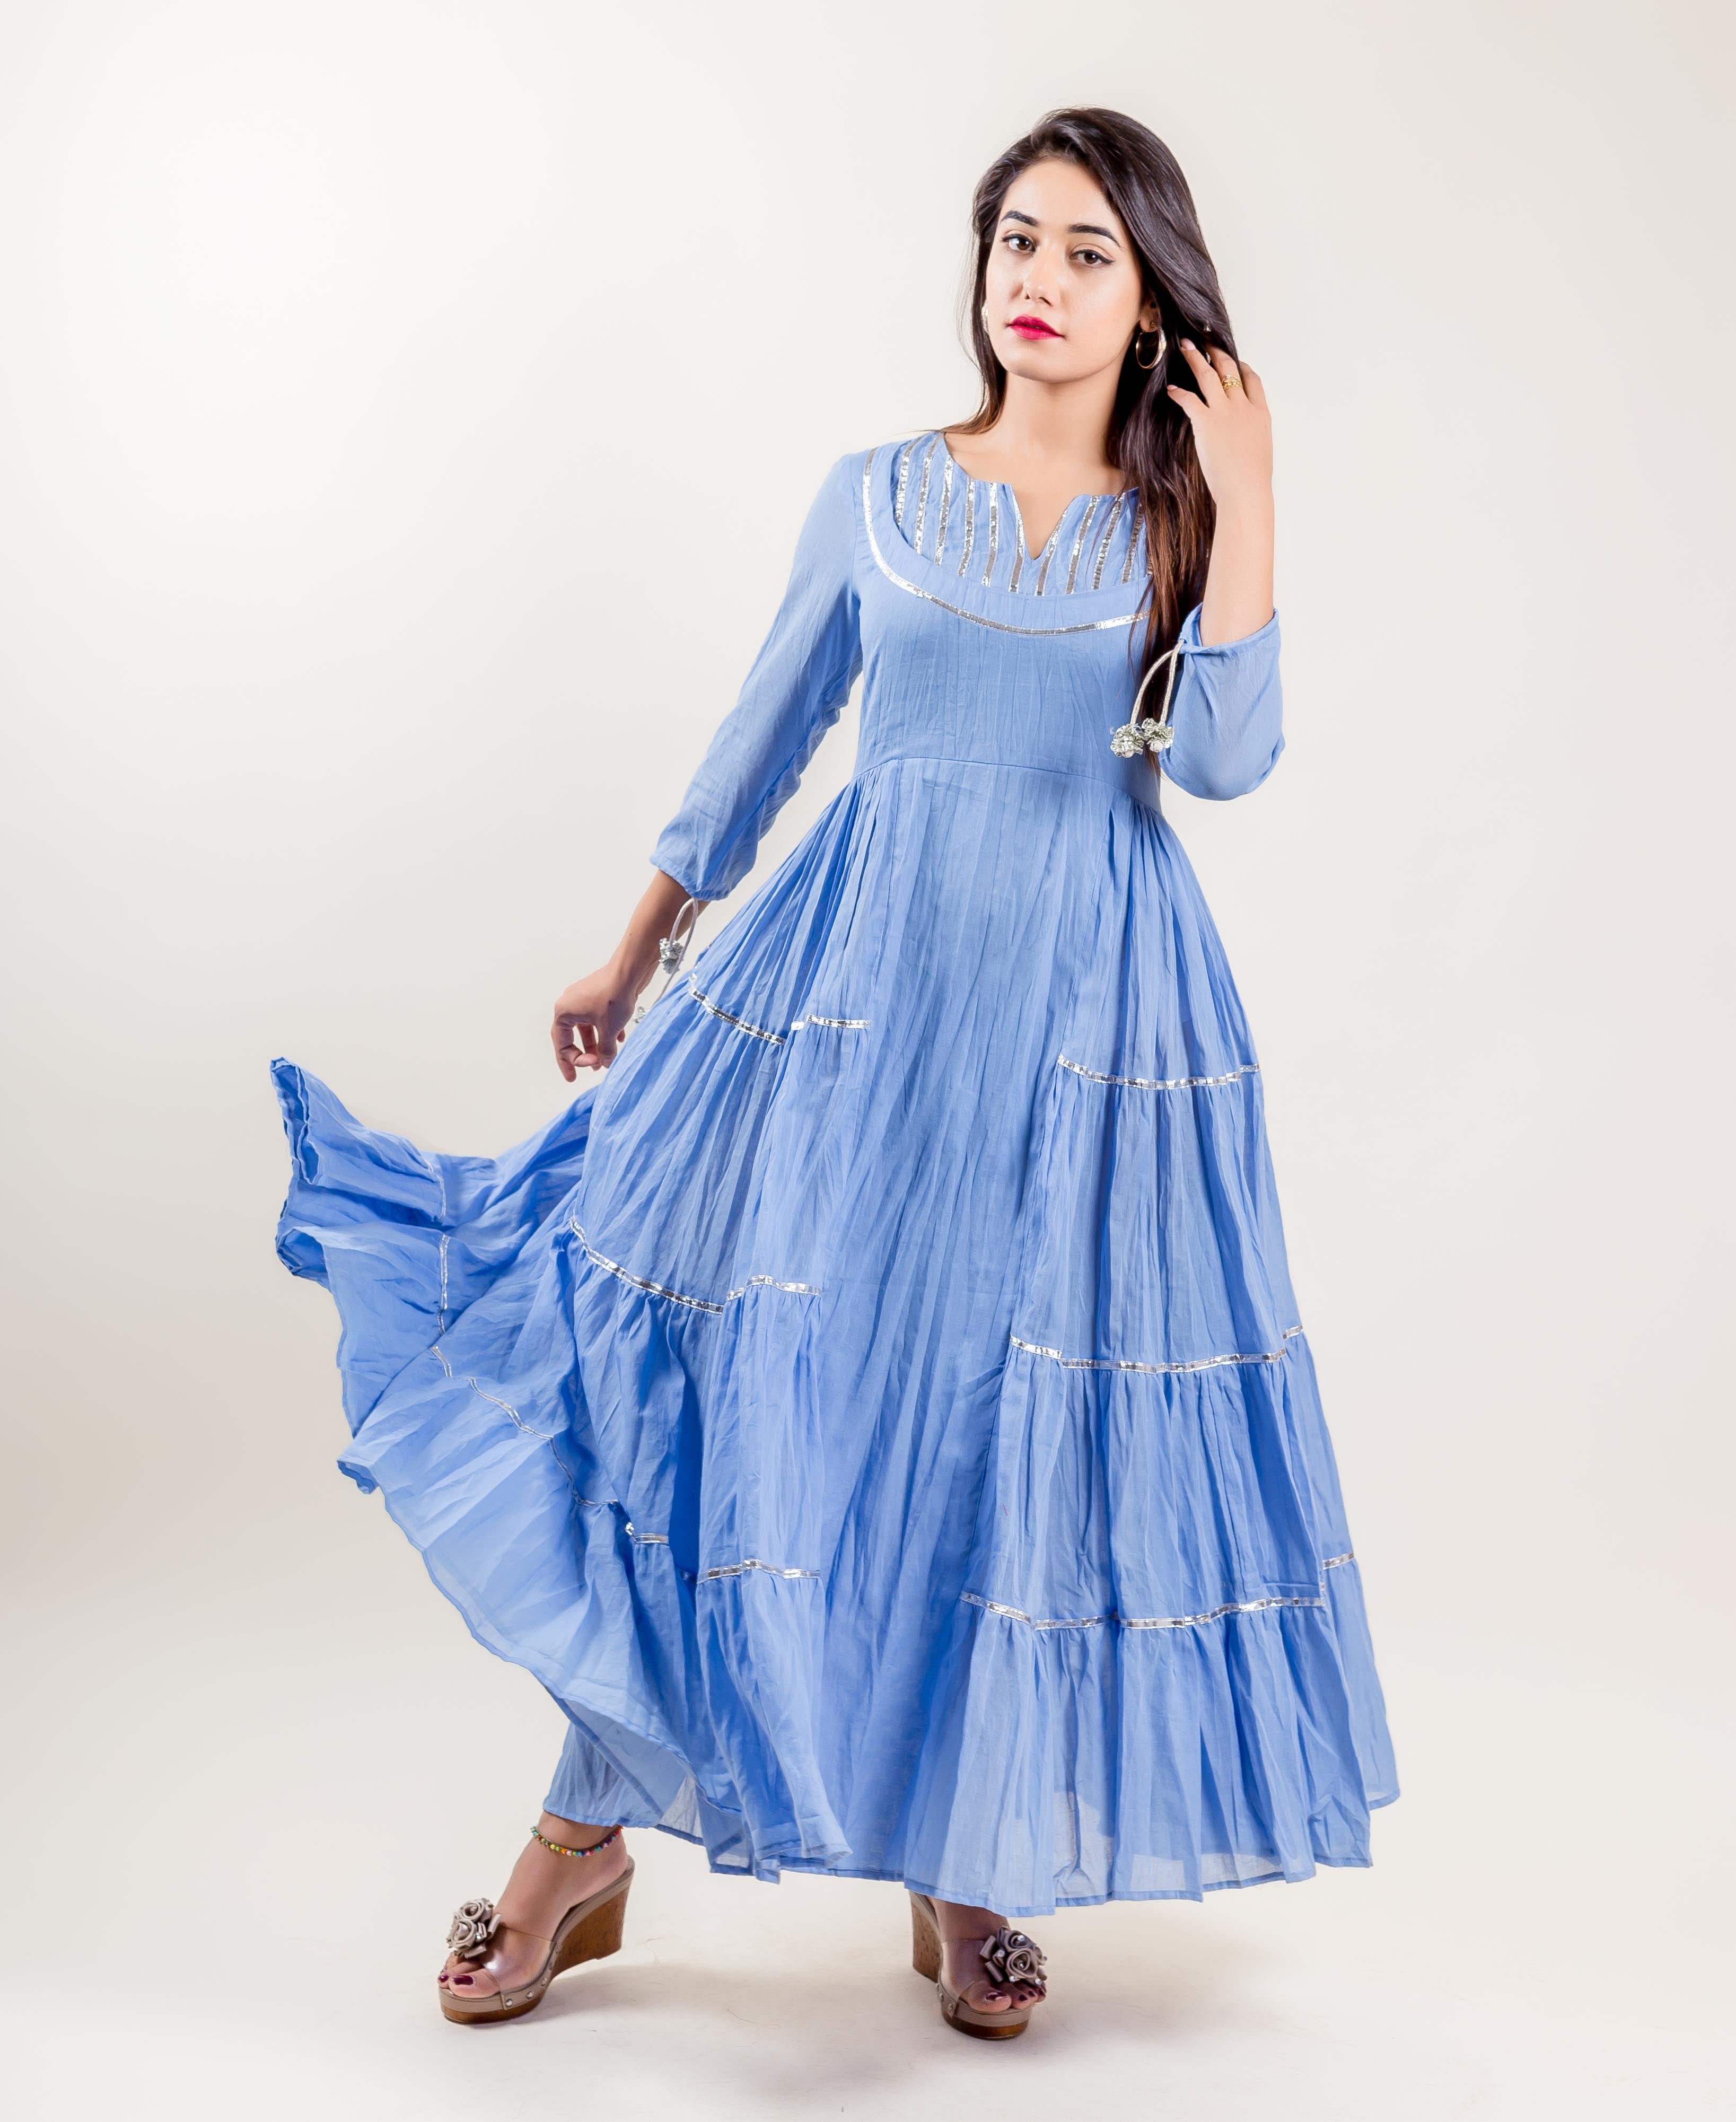 Discover more than 163 ankle length western dresses - seven.edu.vn